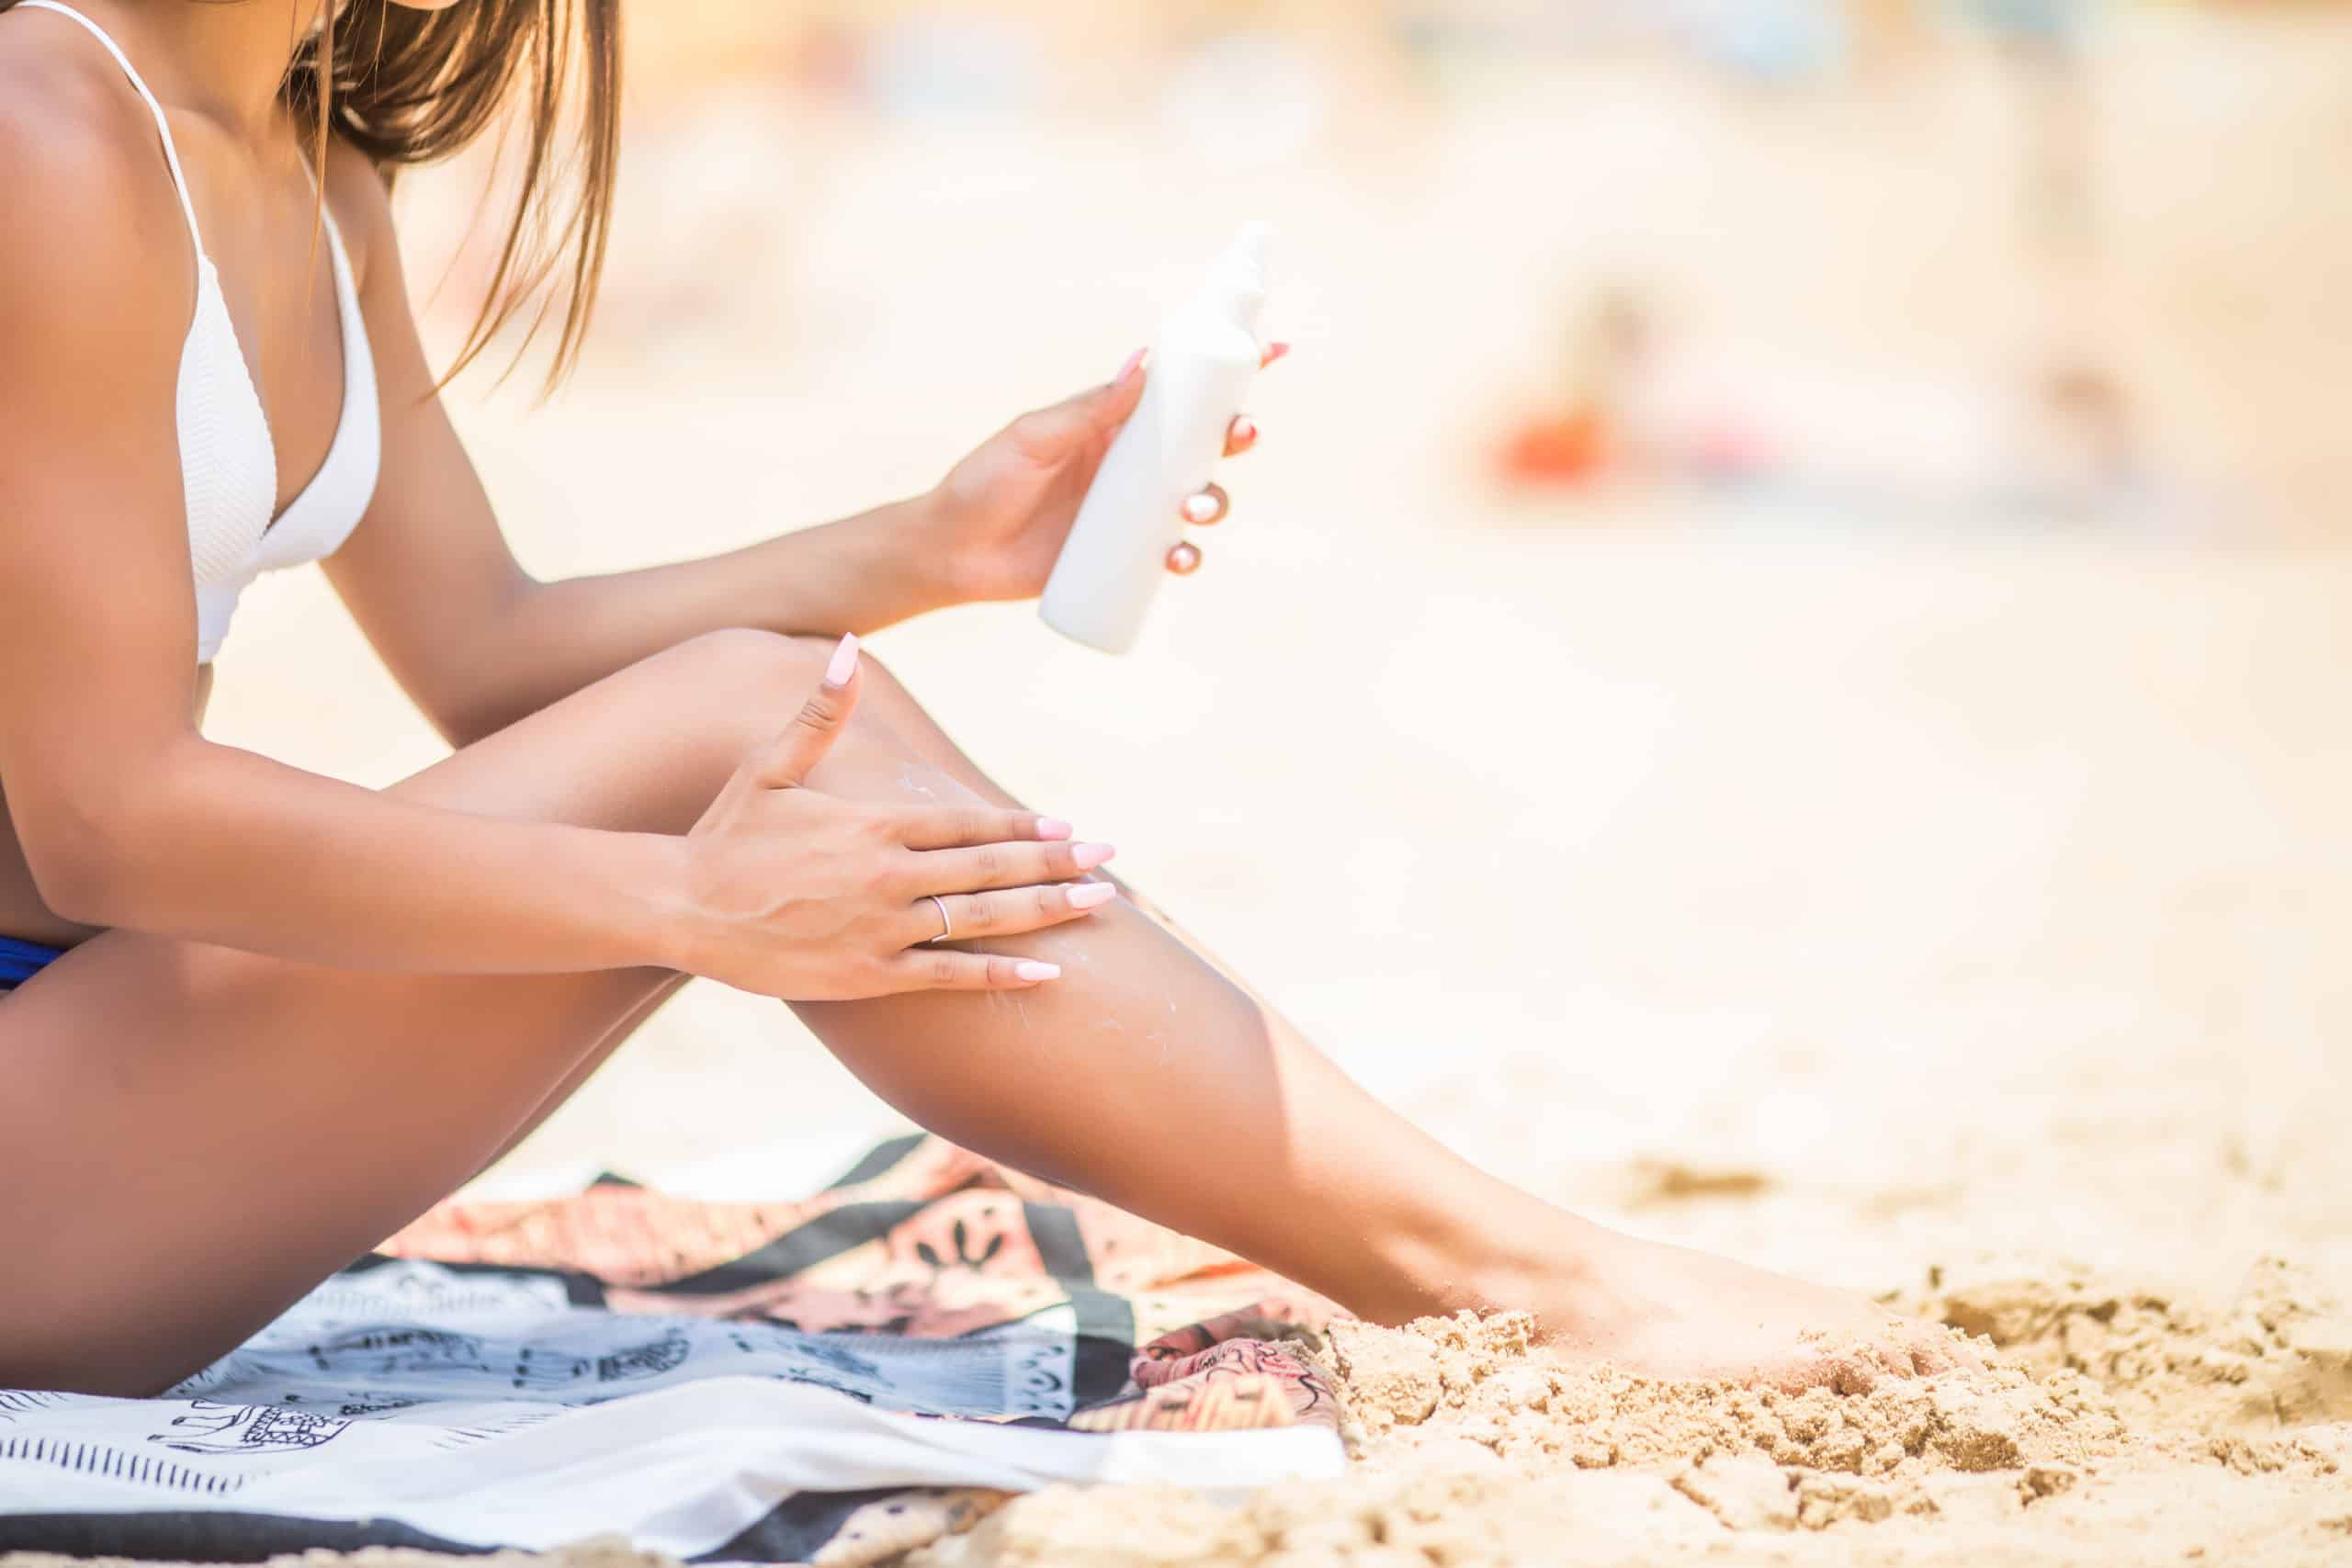 sunscreen-suntan-lotion-spray-bottle-young-woman-spraying-tanning-oil-her-leg-from-bottle-lady-is-massaging-sunscreen-lotion-while-sunbathing-beach-female-model-during-summer-vacation-scaled